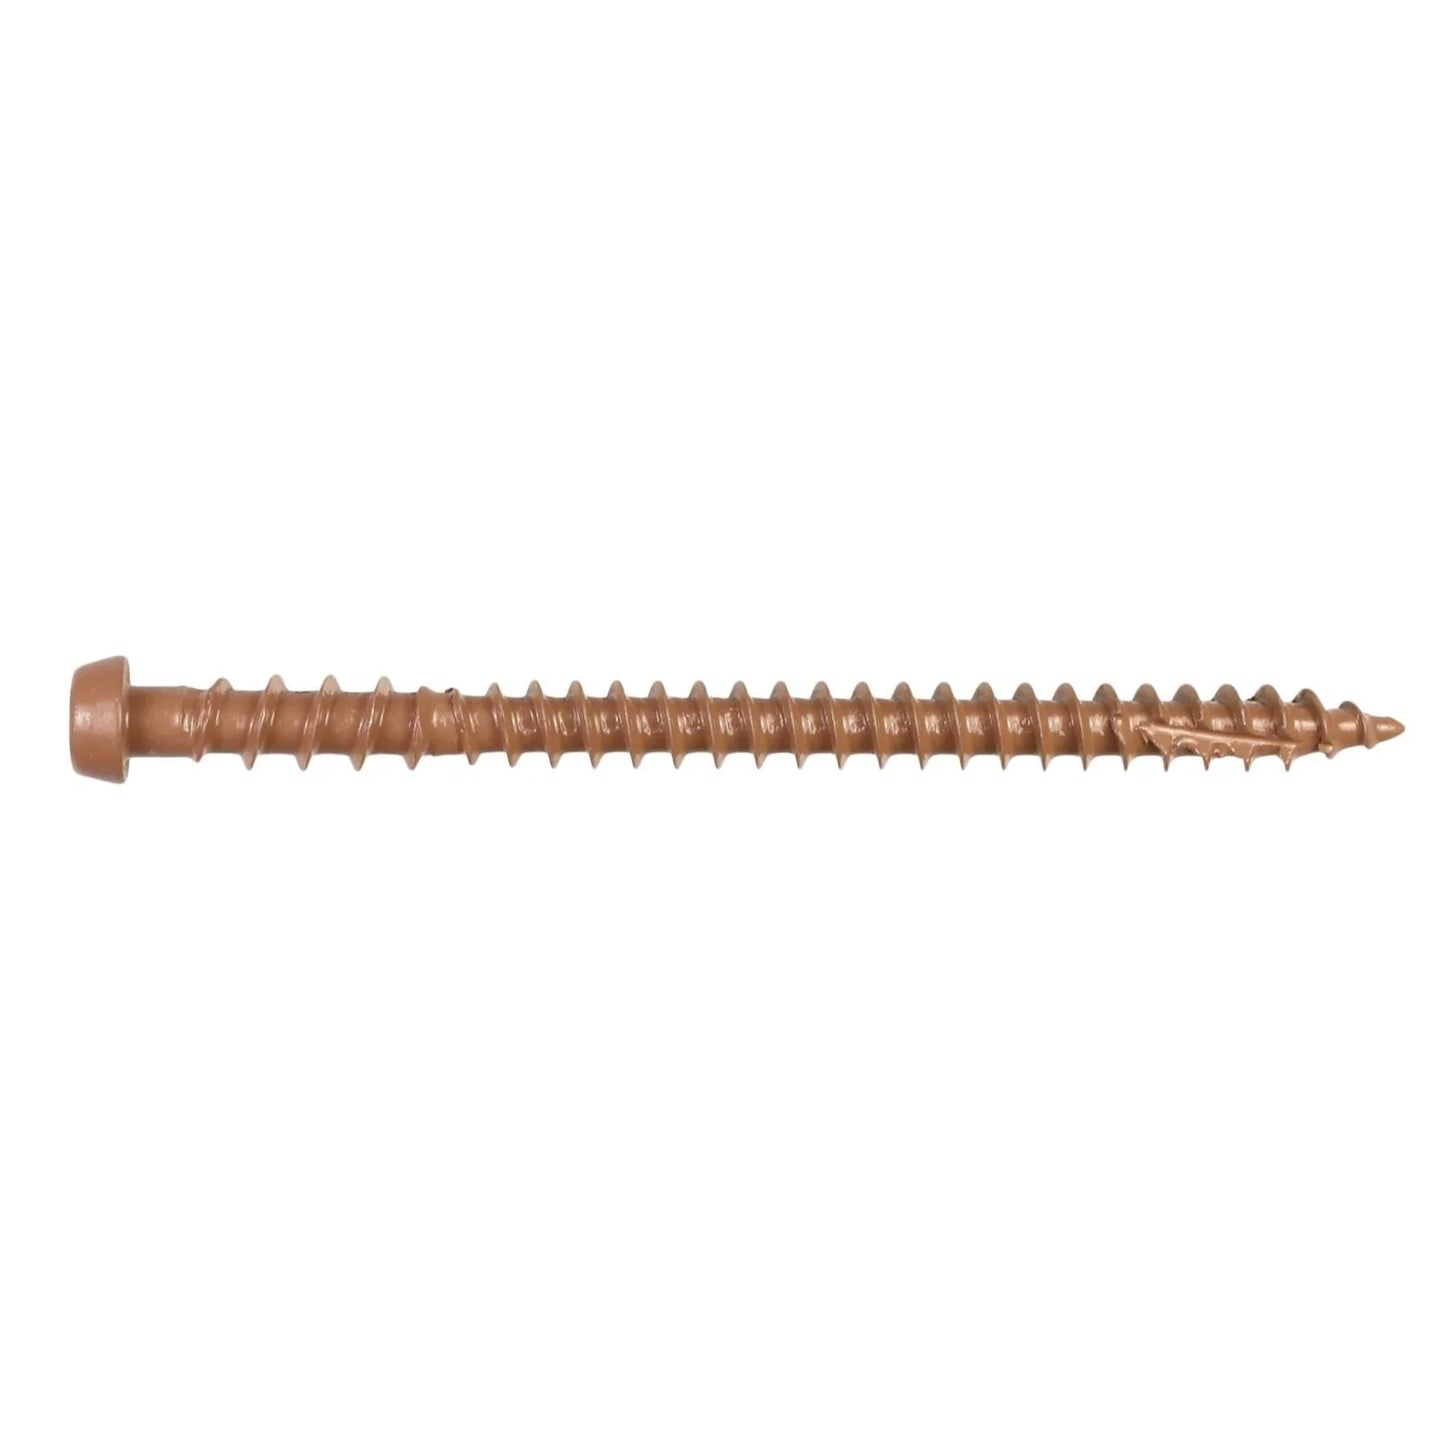 Loose DCU Collated Screws for Composite Decking